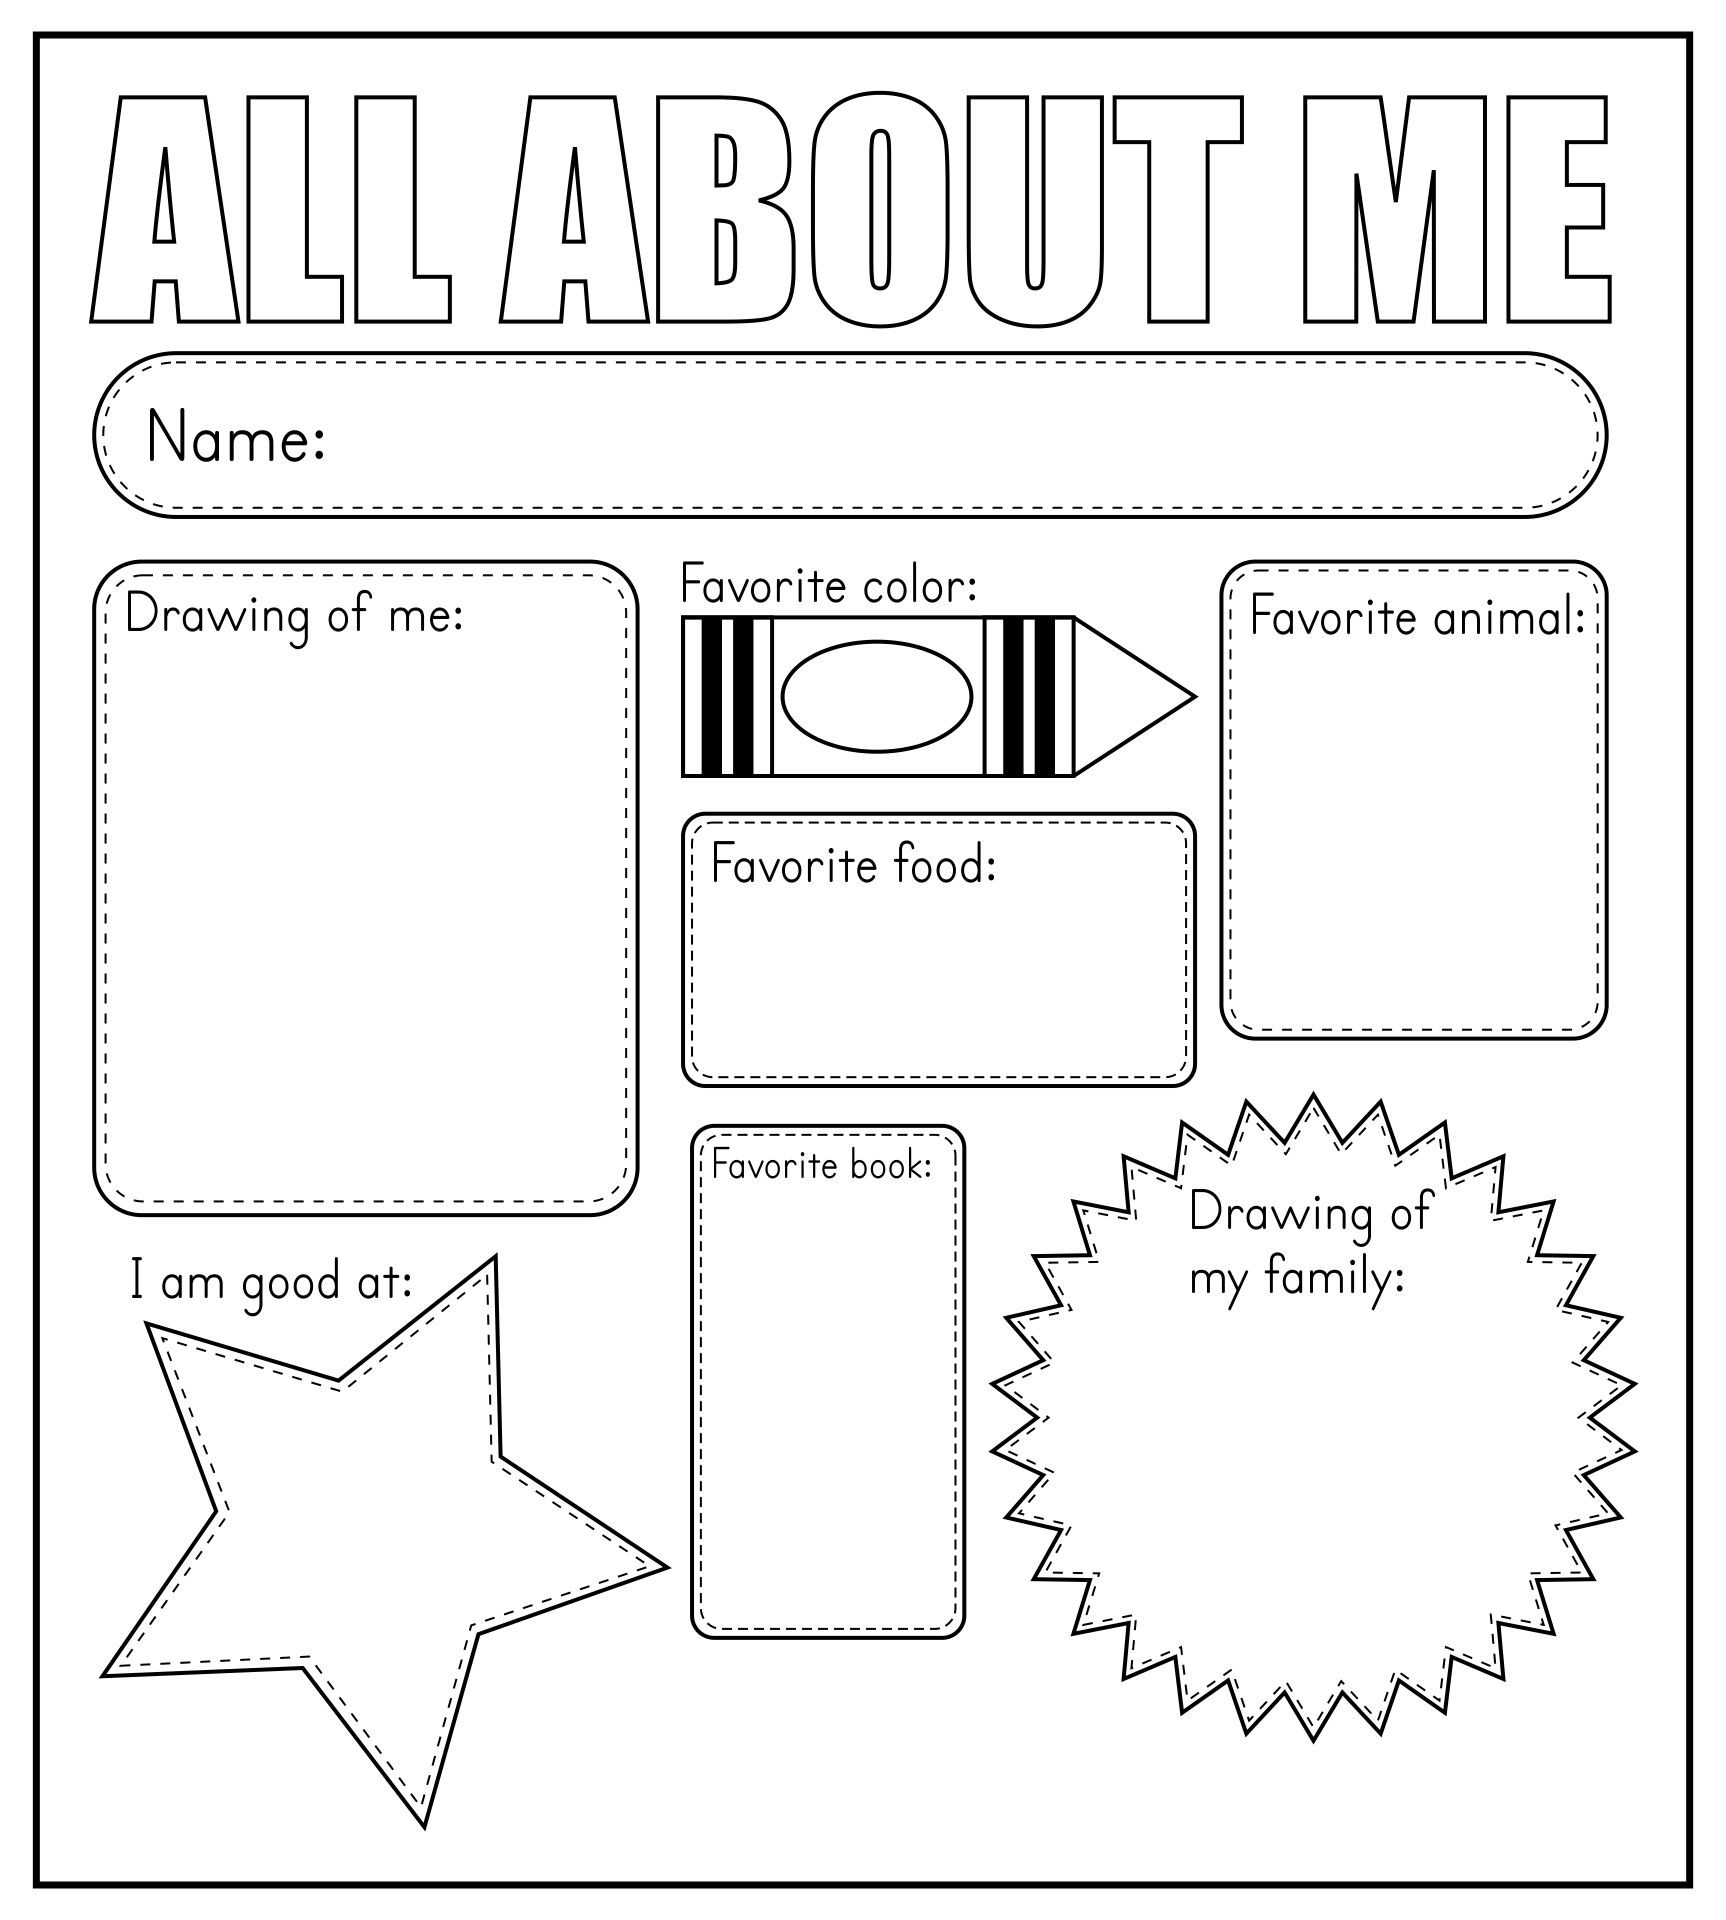 10-best-all-about-me-printable-template-printablee